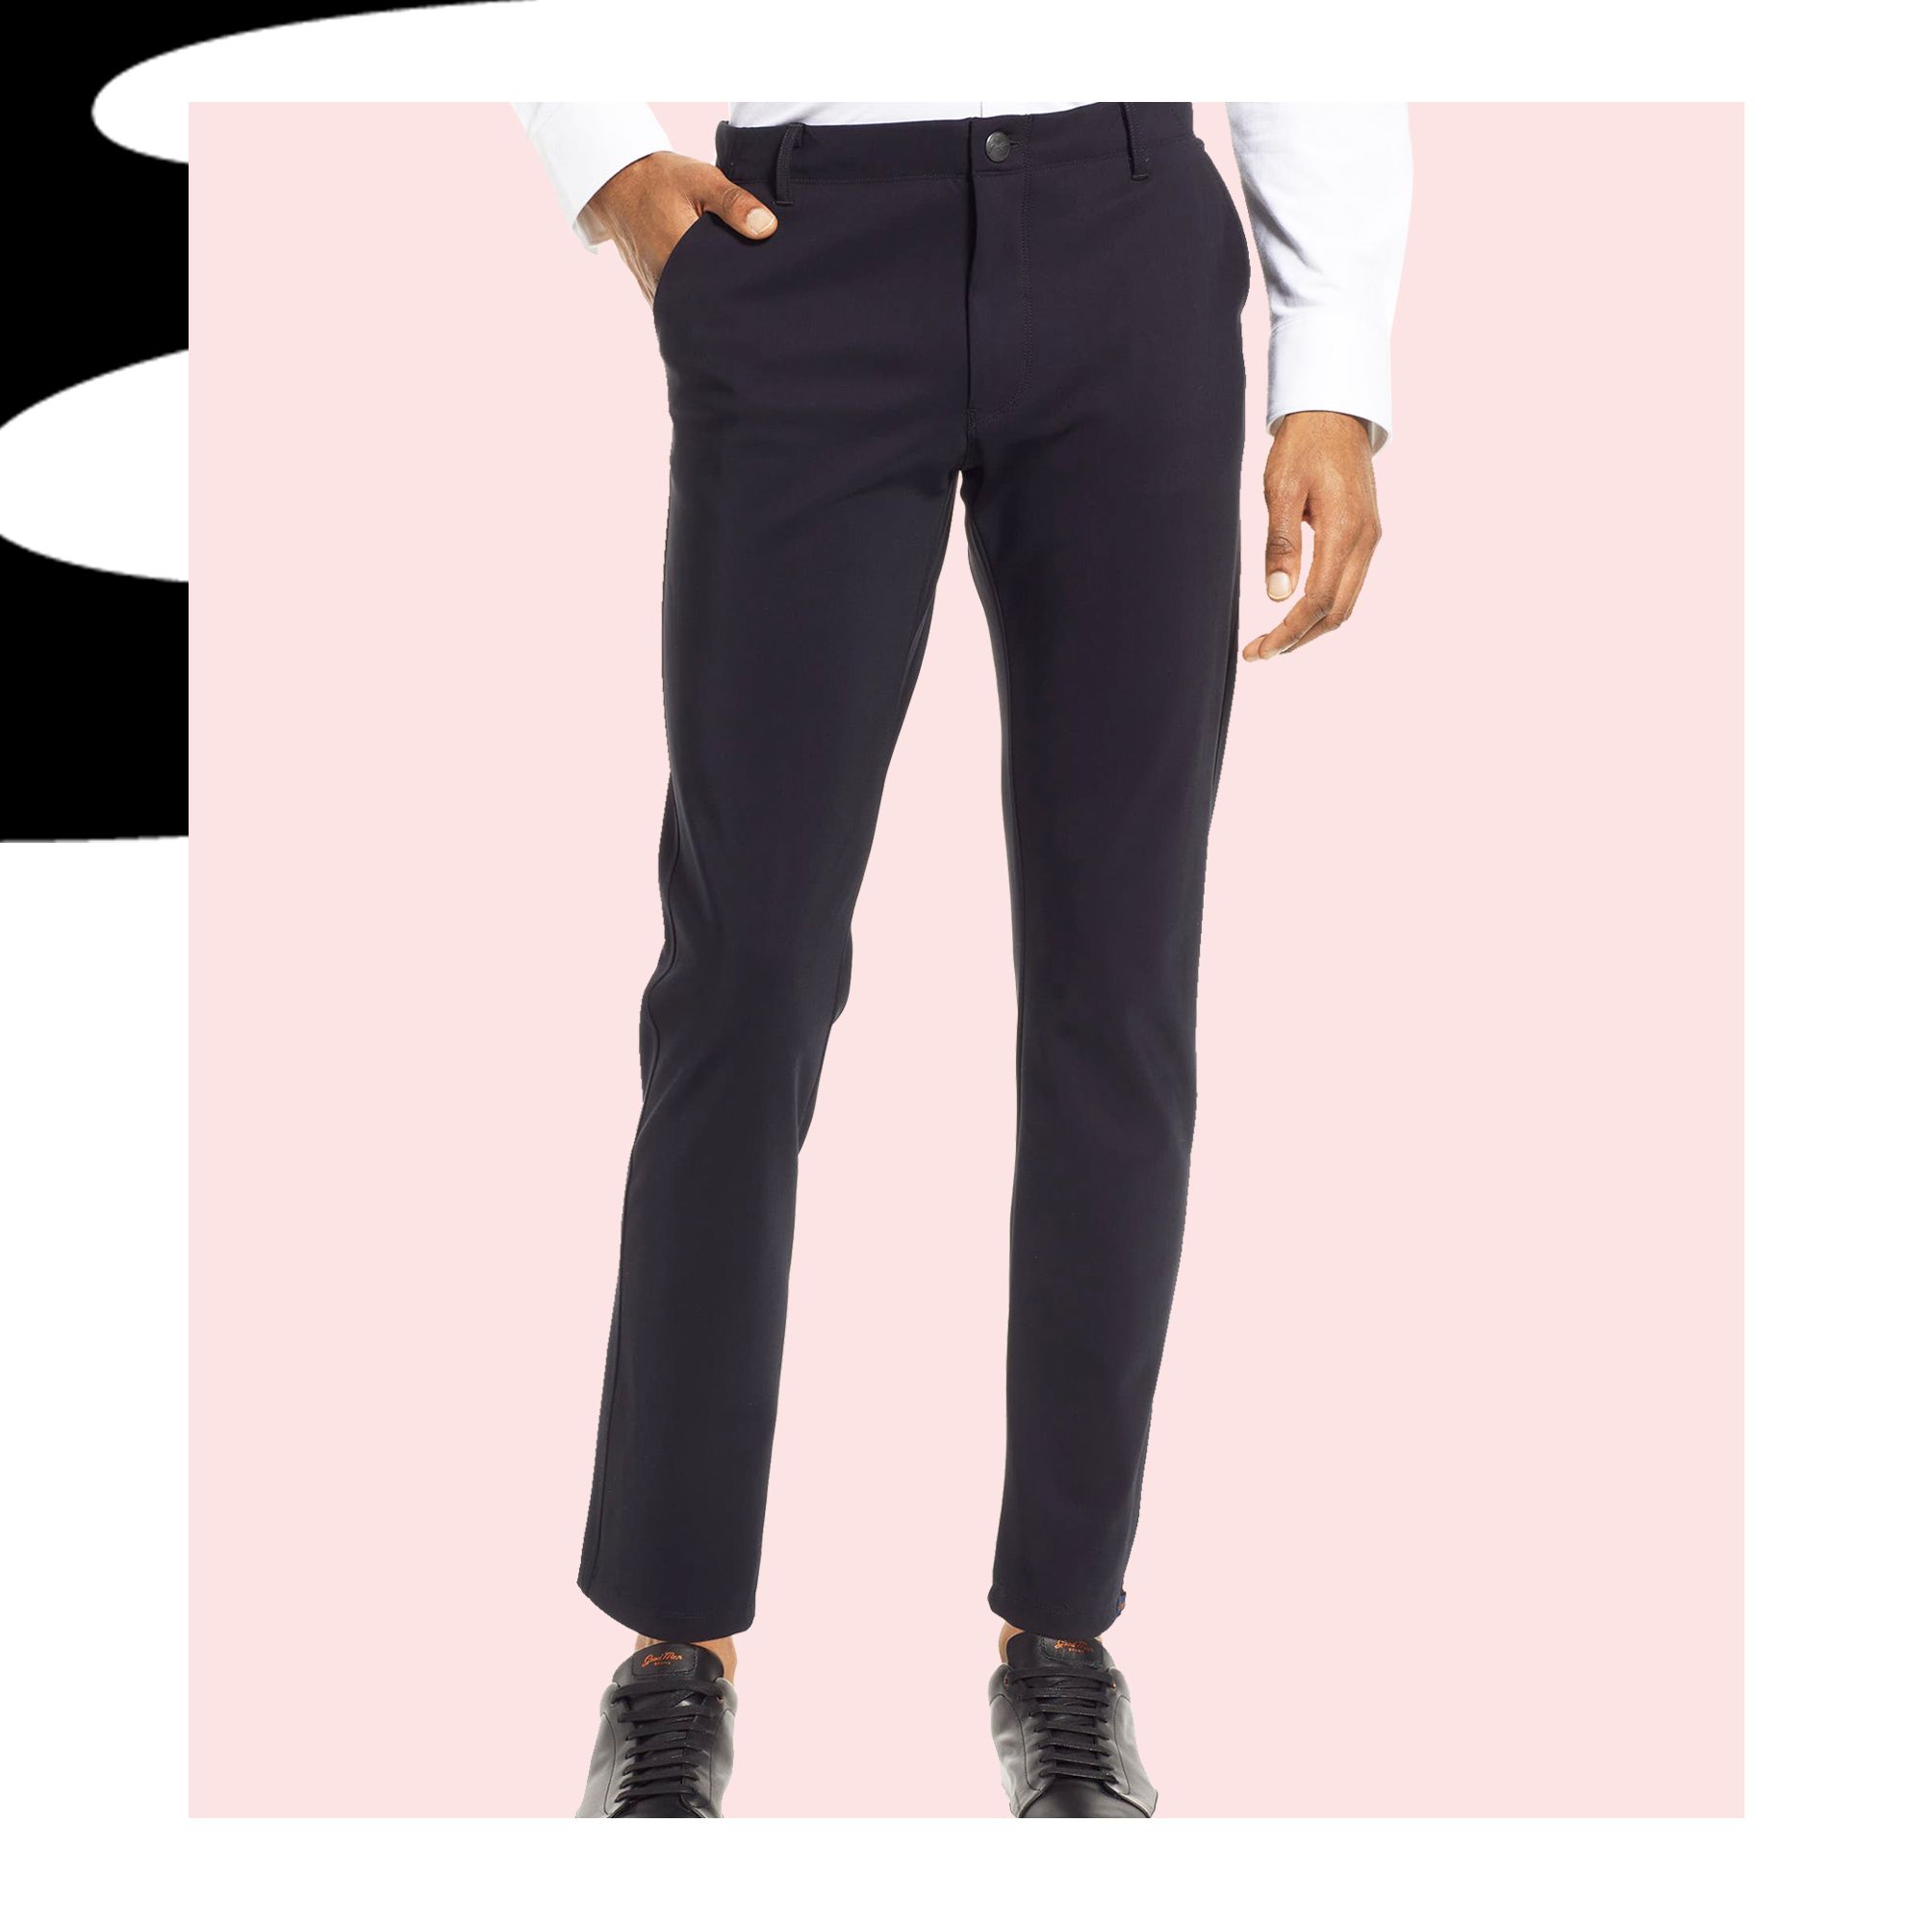 The 20 Best Pants to Wear to Work